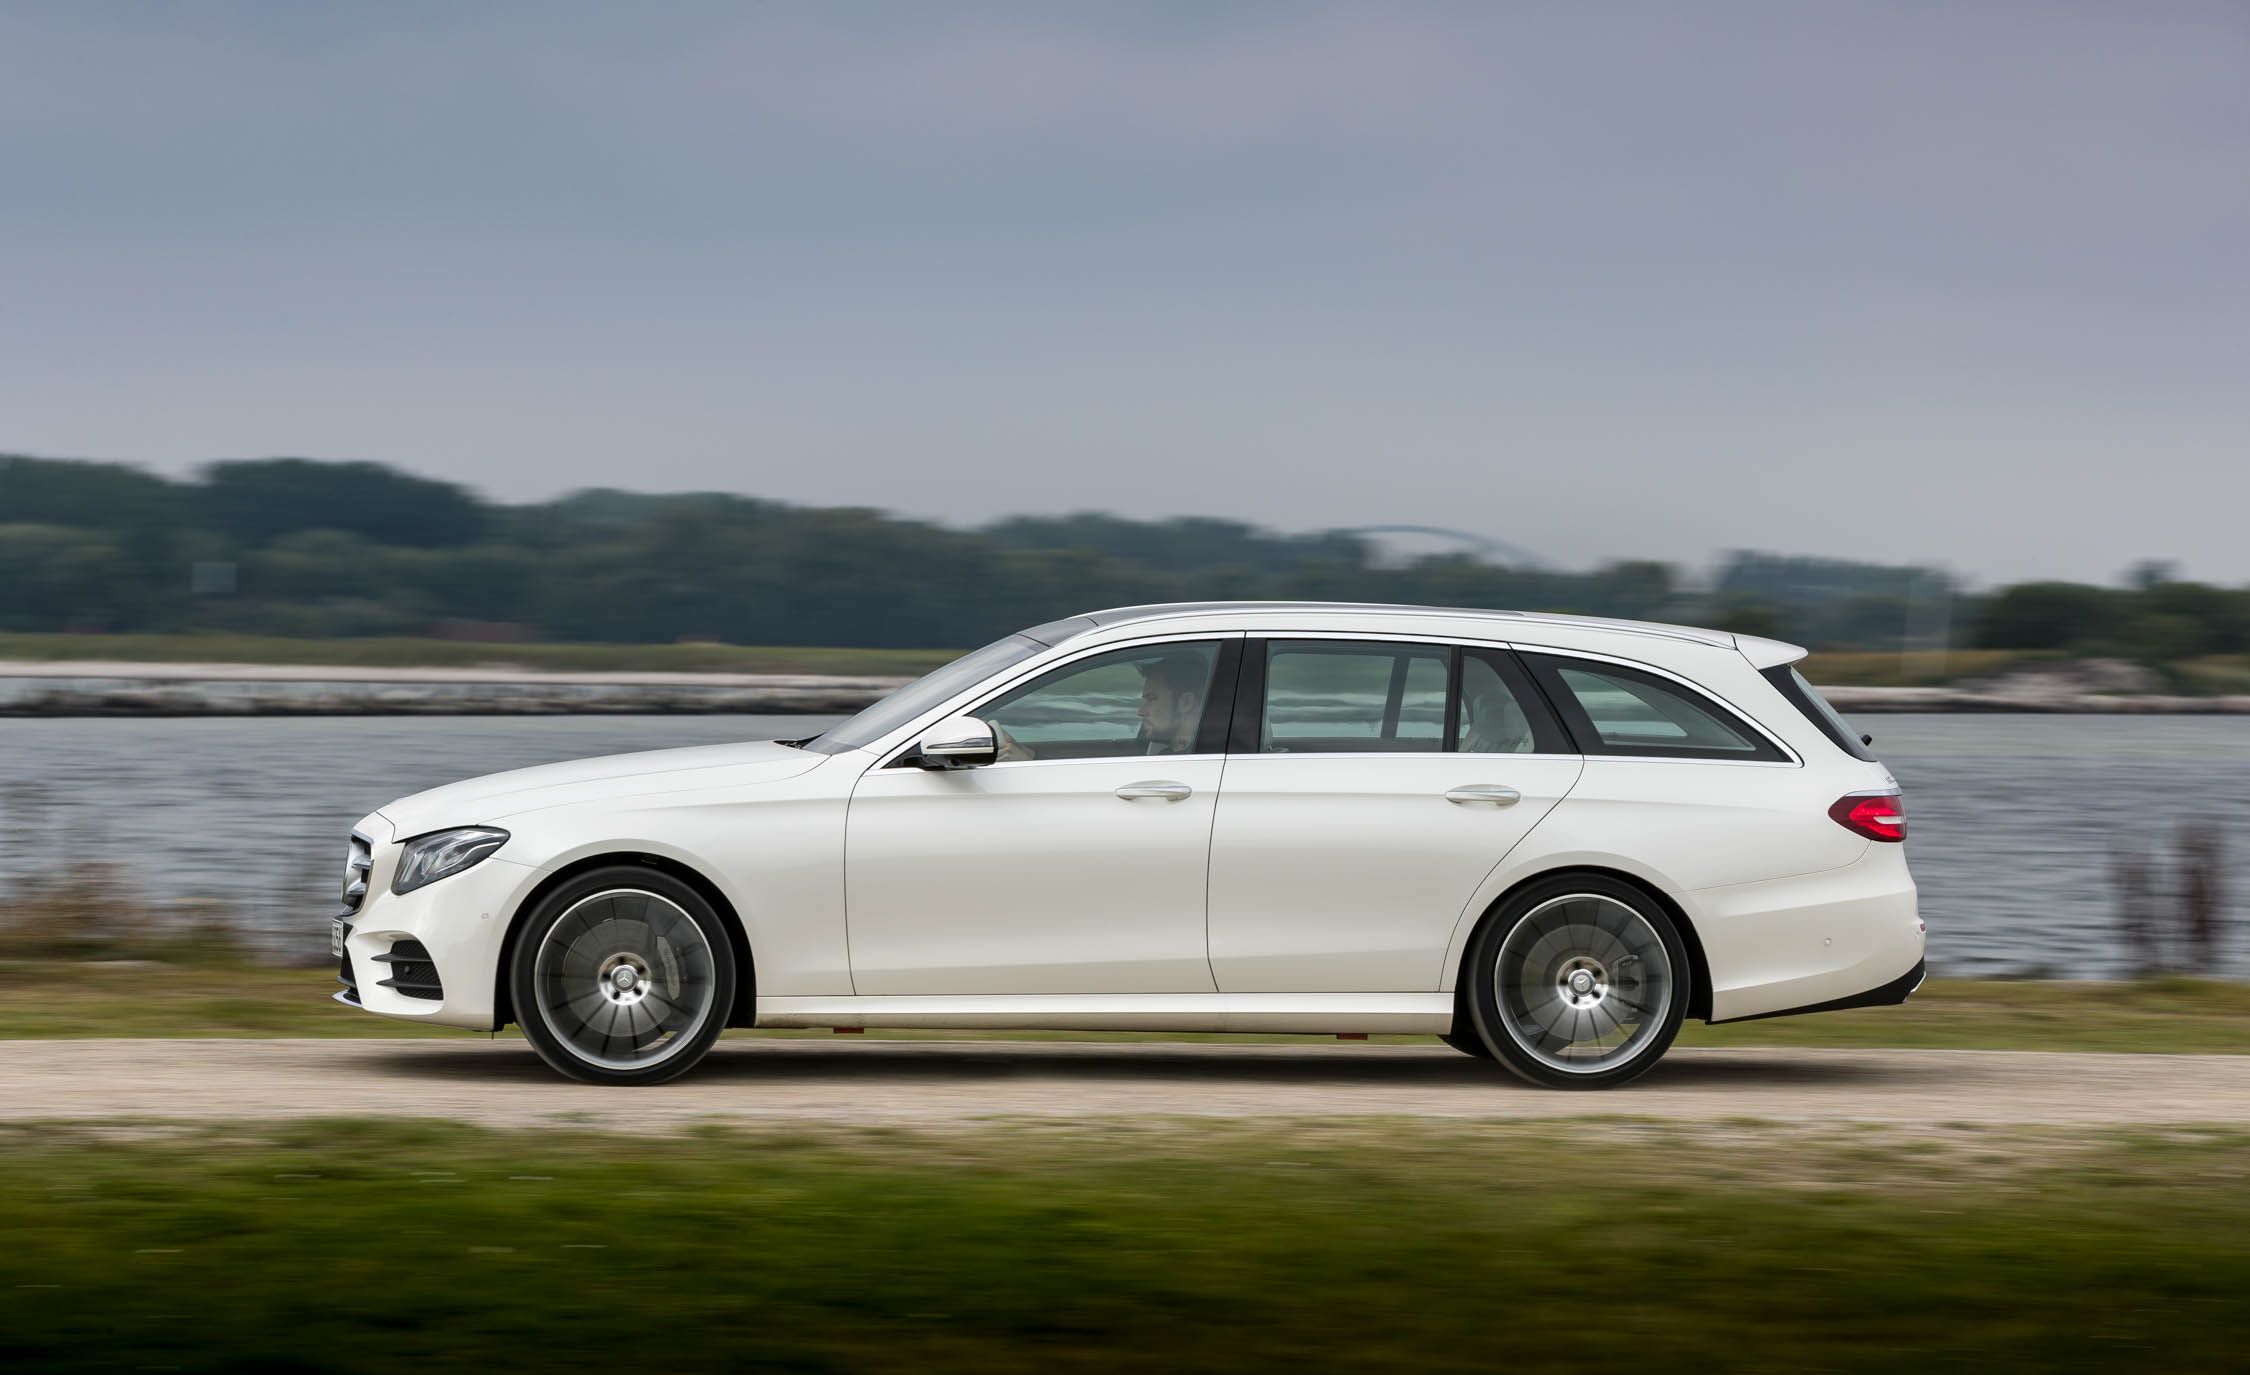 2017 Mercedes Benz E Class Wagon Test Drive Side View (View 2 of 24)